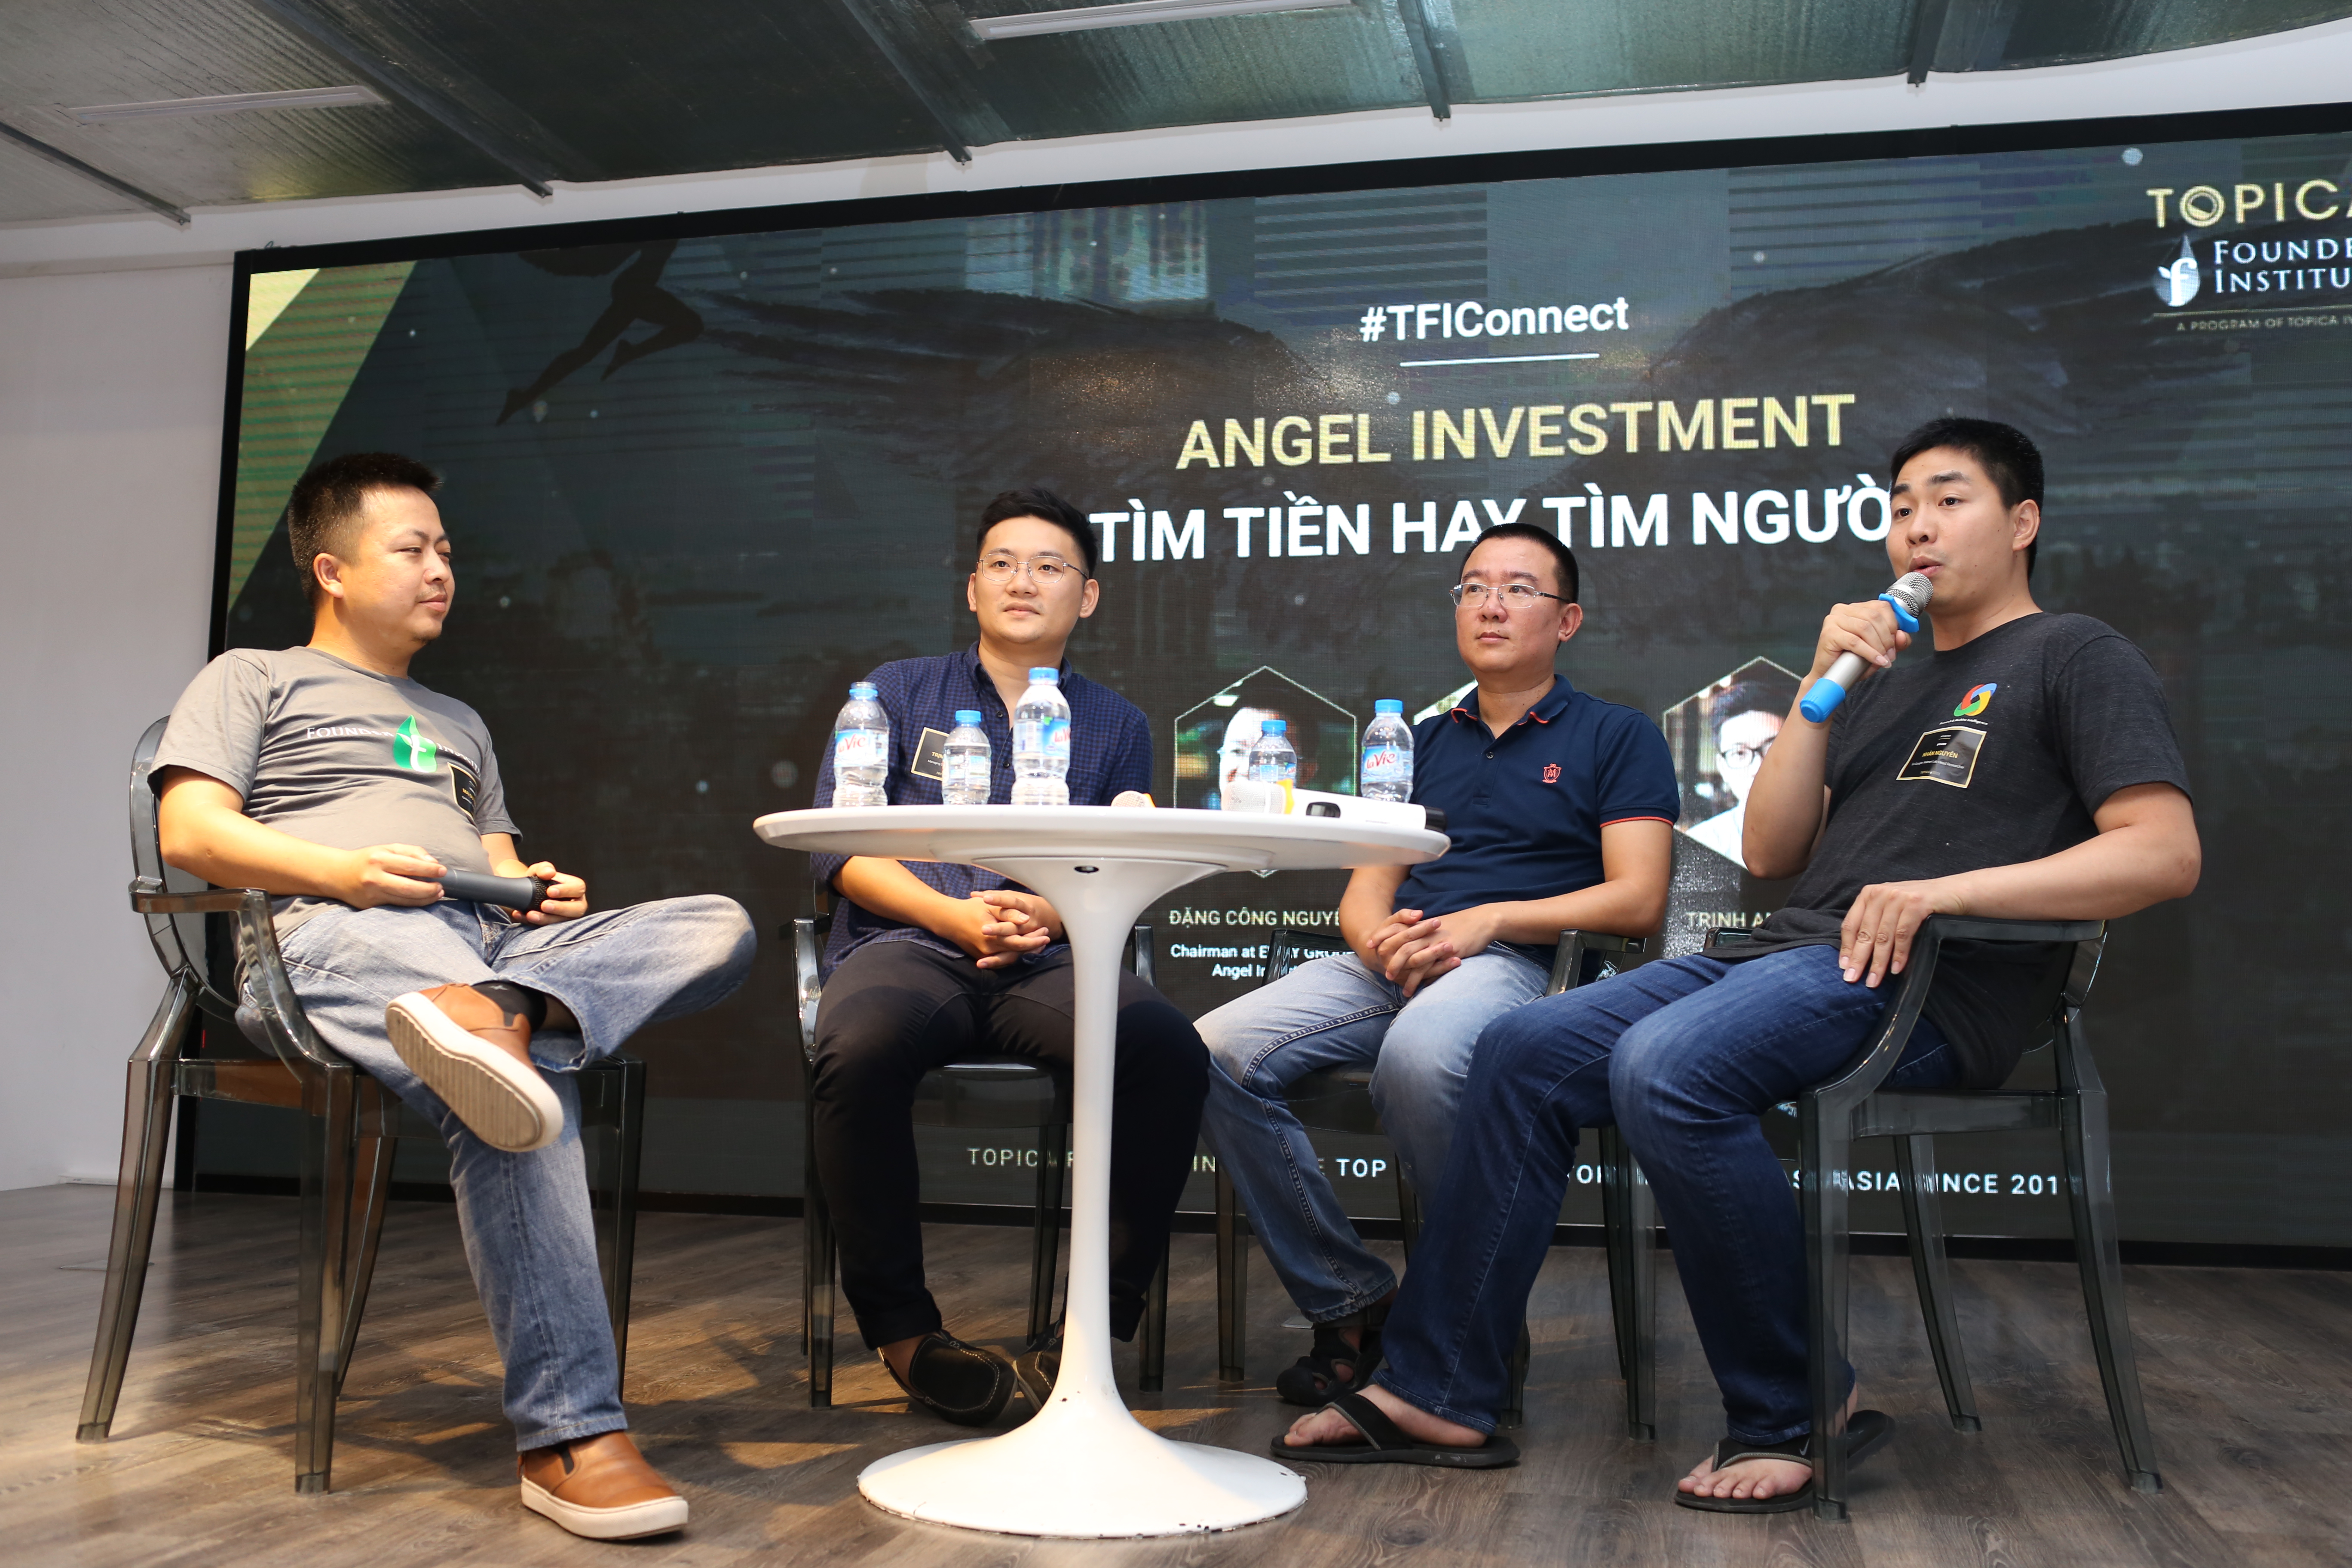 Angel investors shared experiences with Vietnamese startups